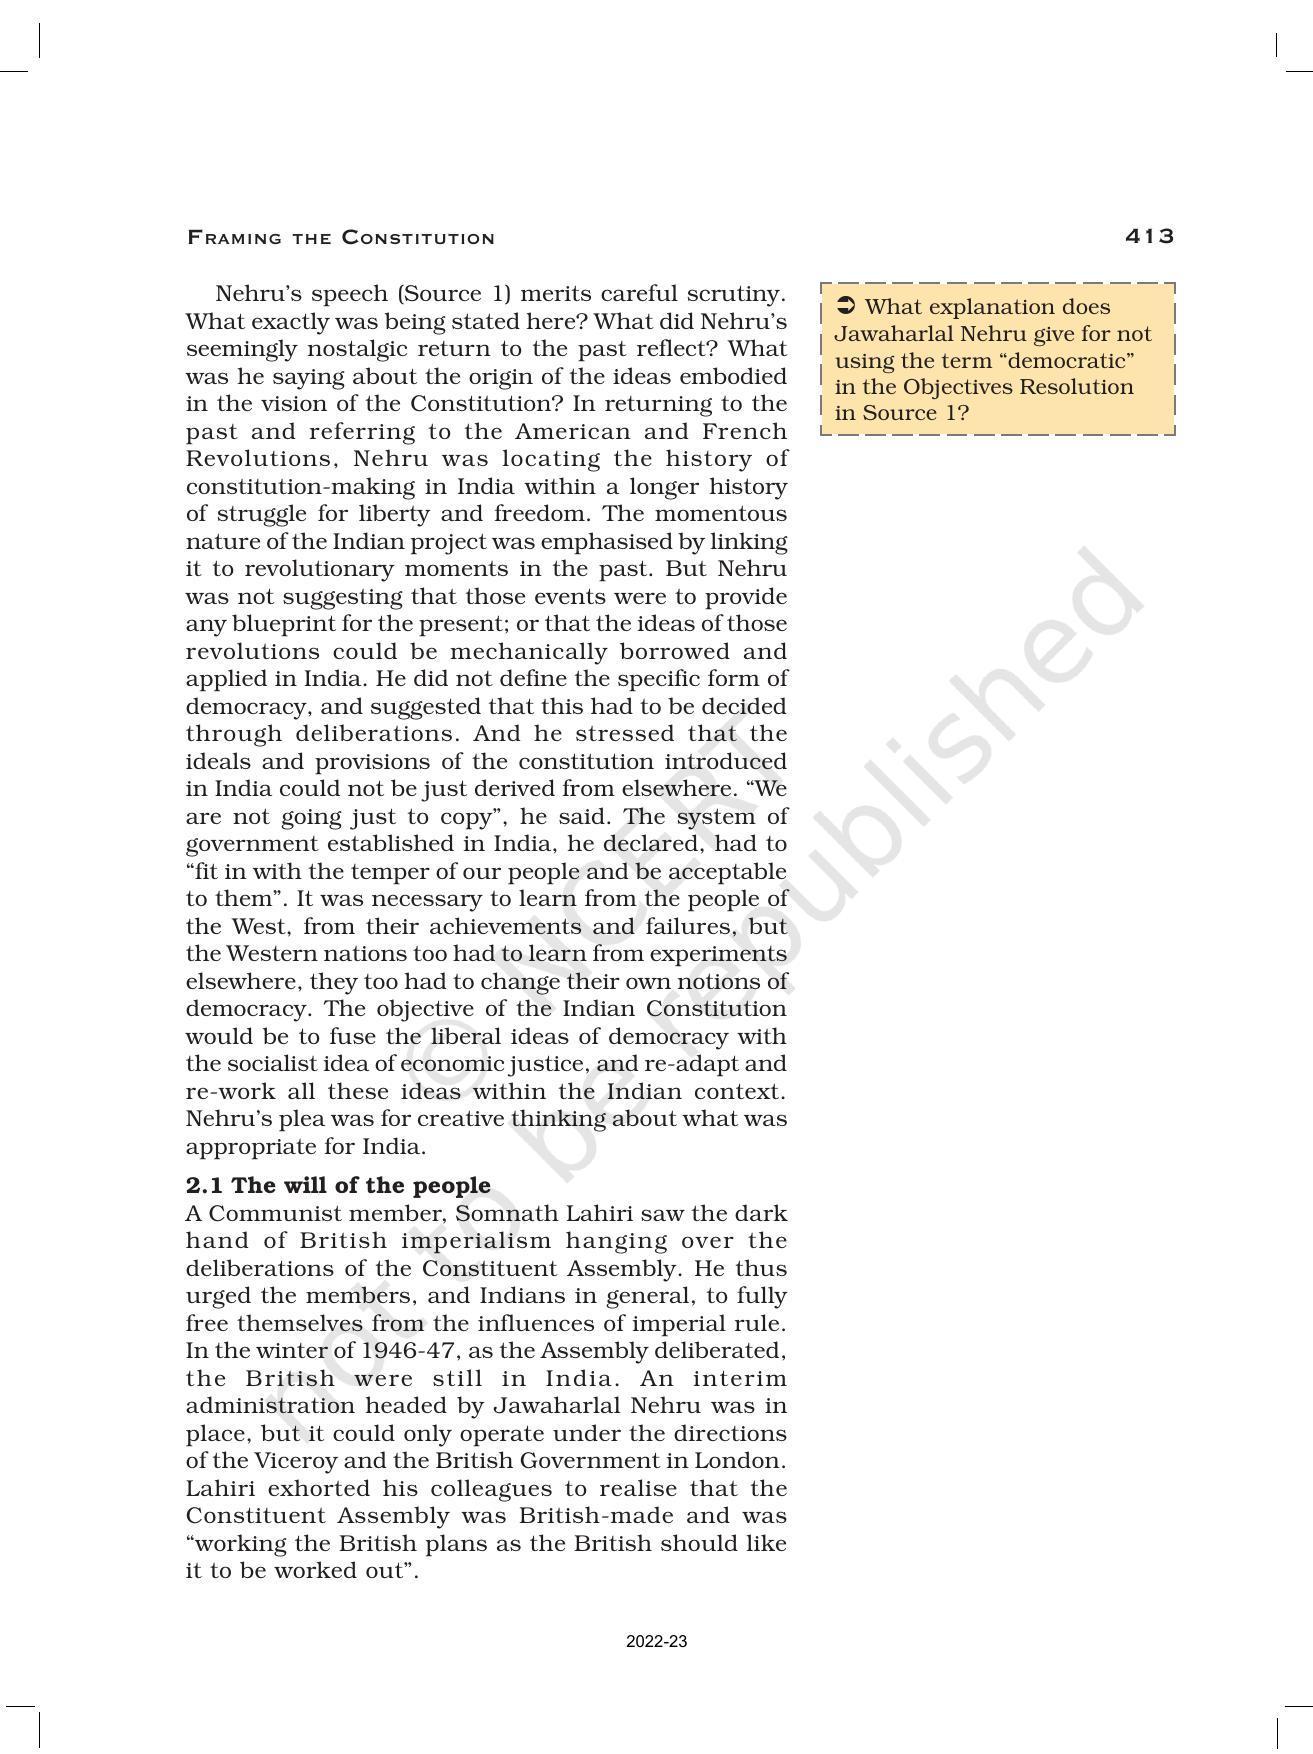 NCERT Book for Class 12 History (Part-III) Chapter 15 Framing and the Constitution - Page 9